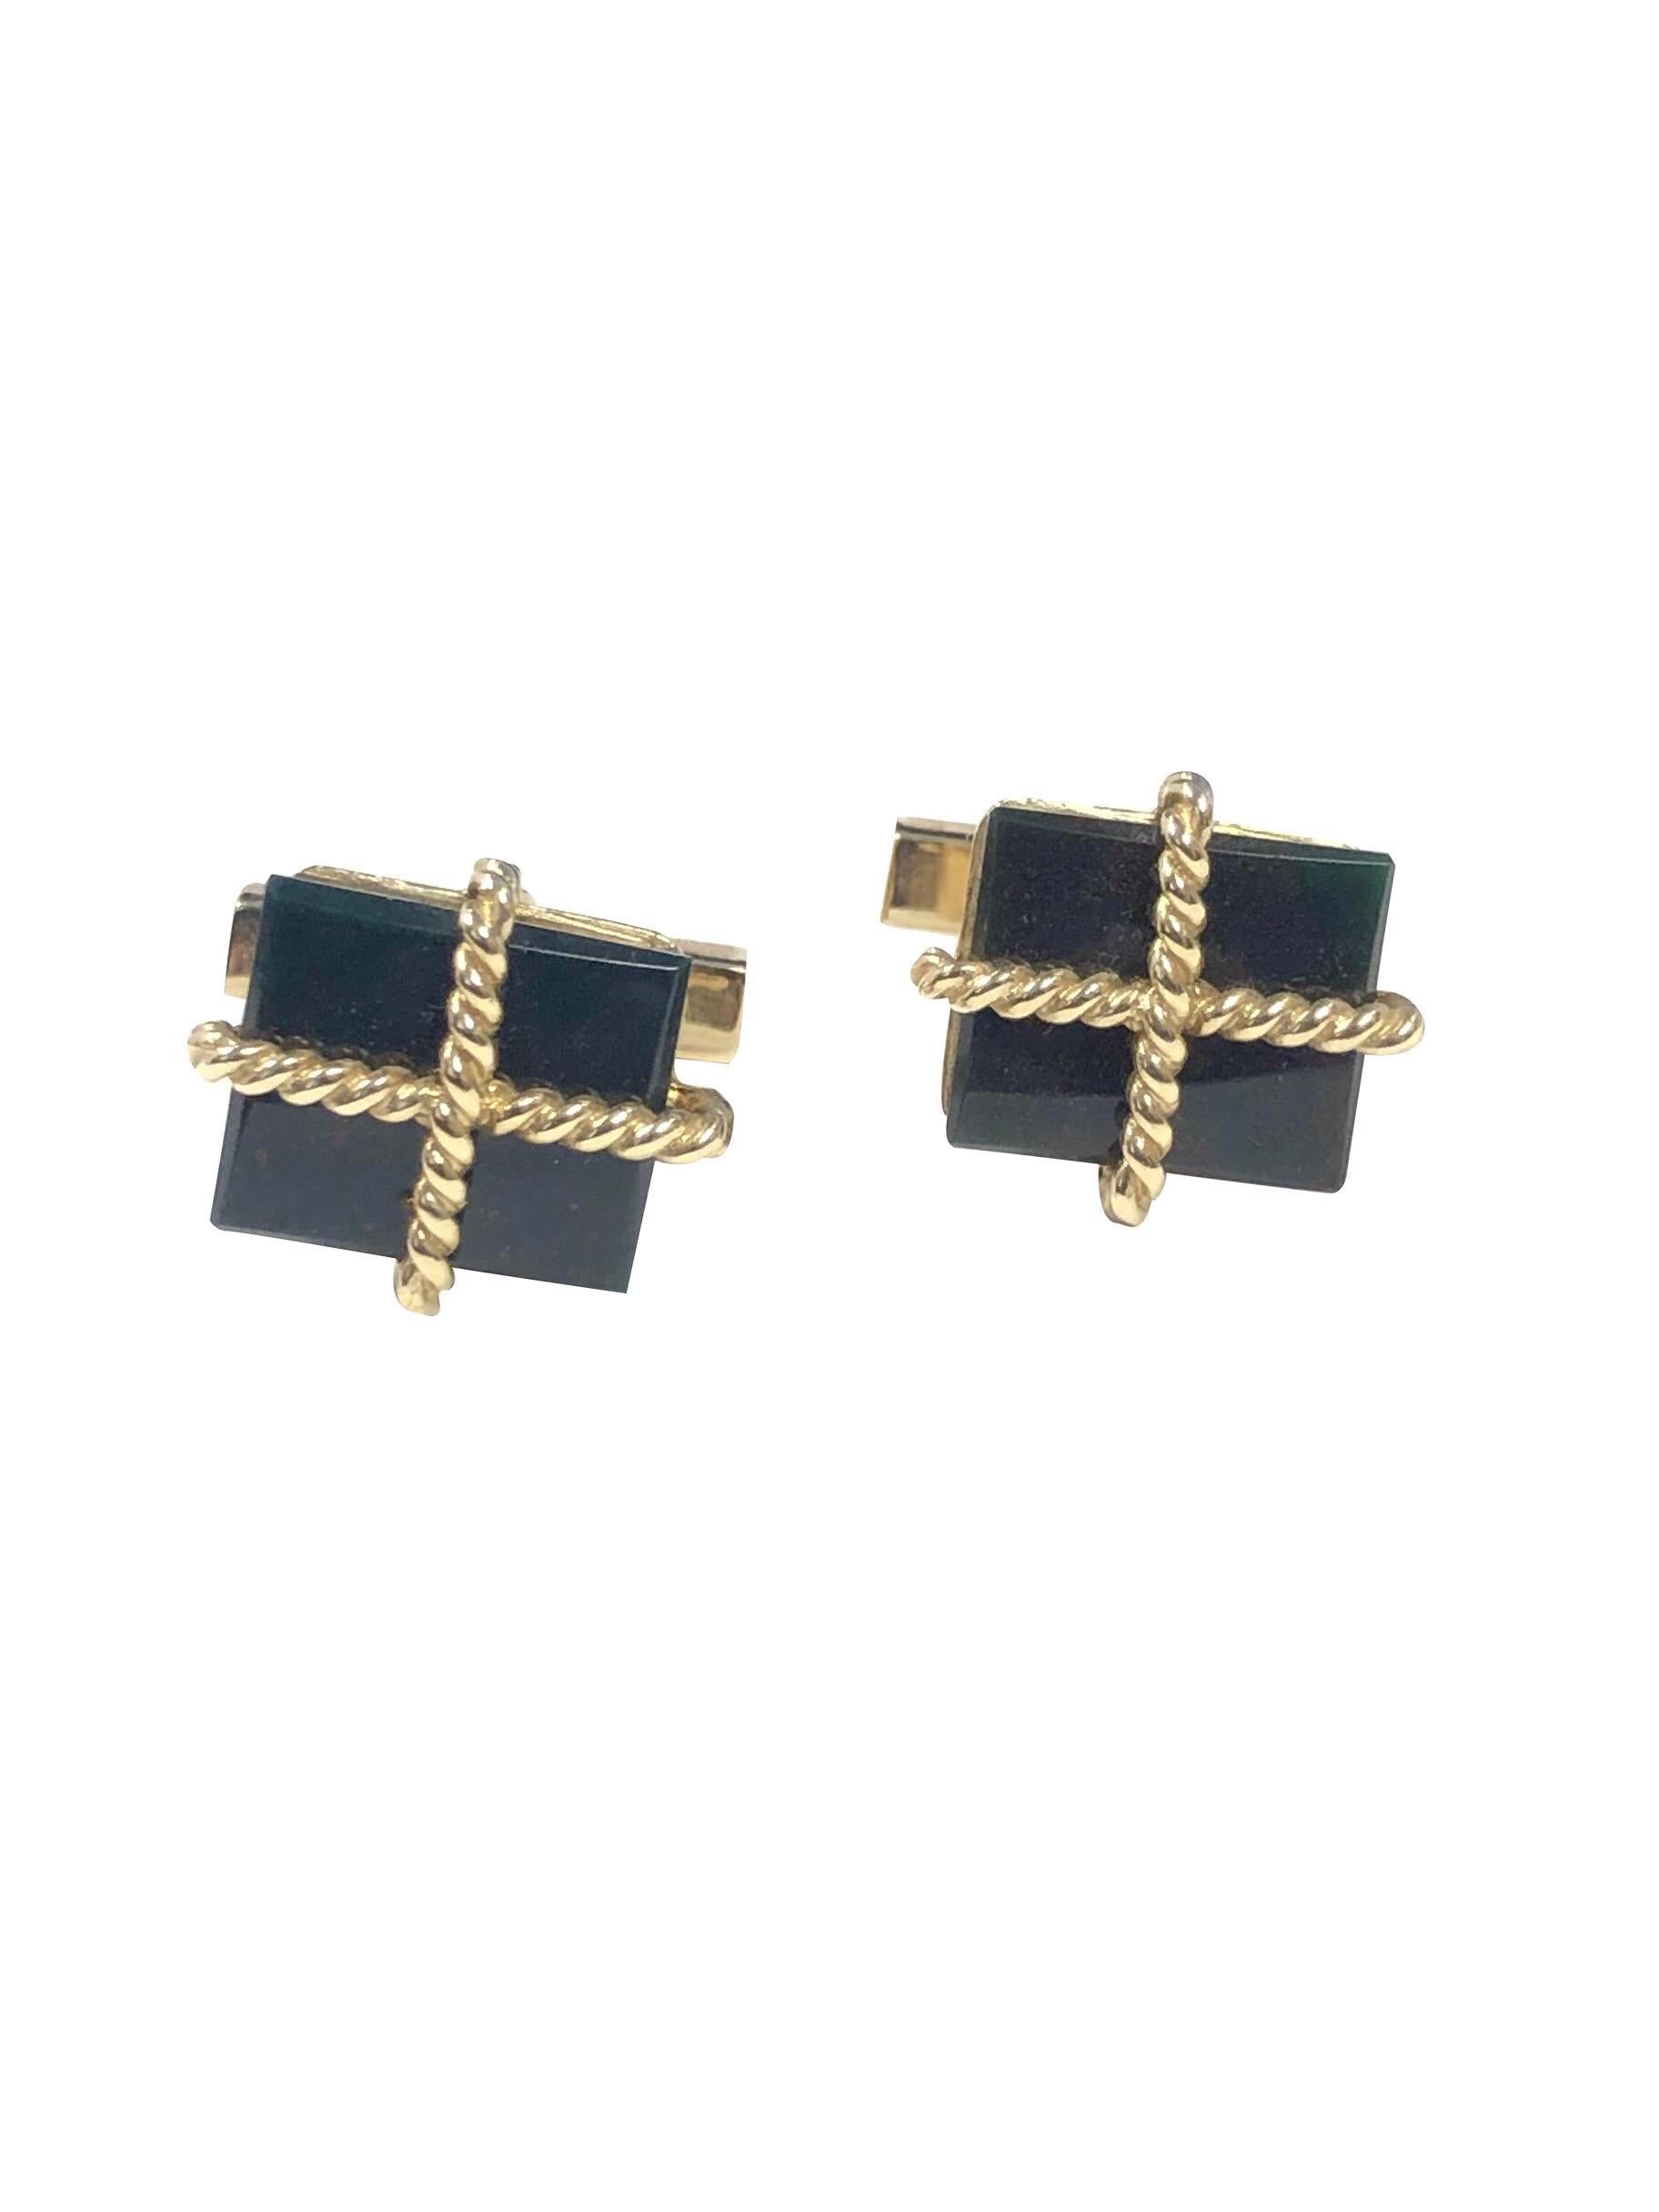 Tiffany & Co. Vintage Gold and Blood Stone Cufflinks 1